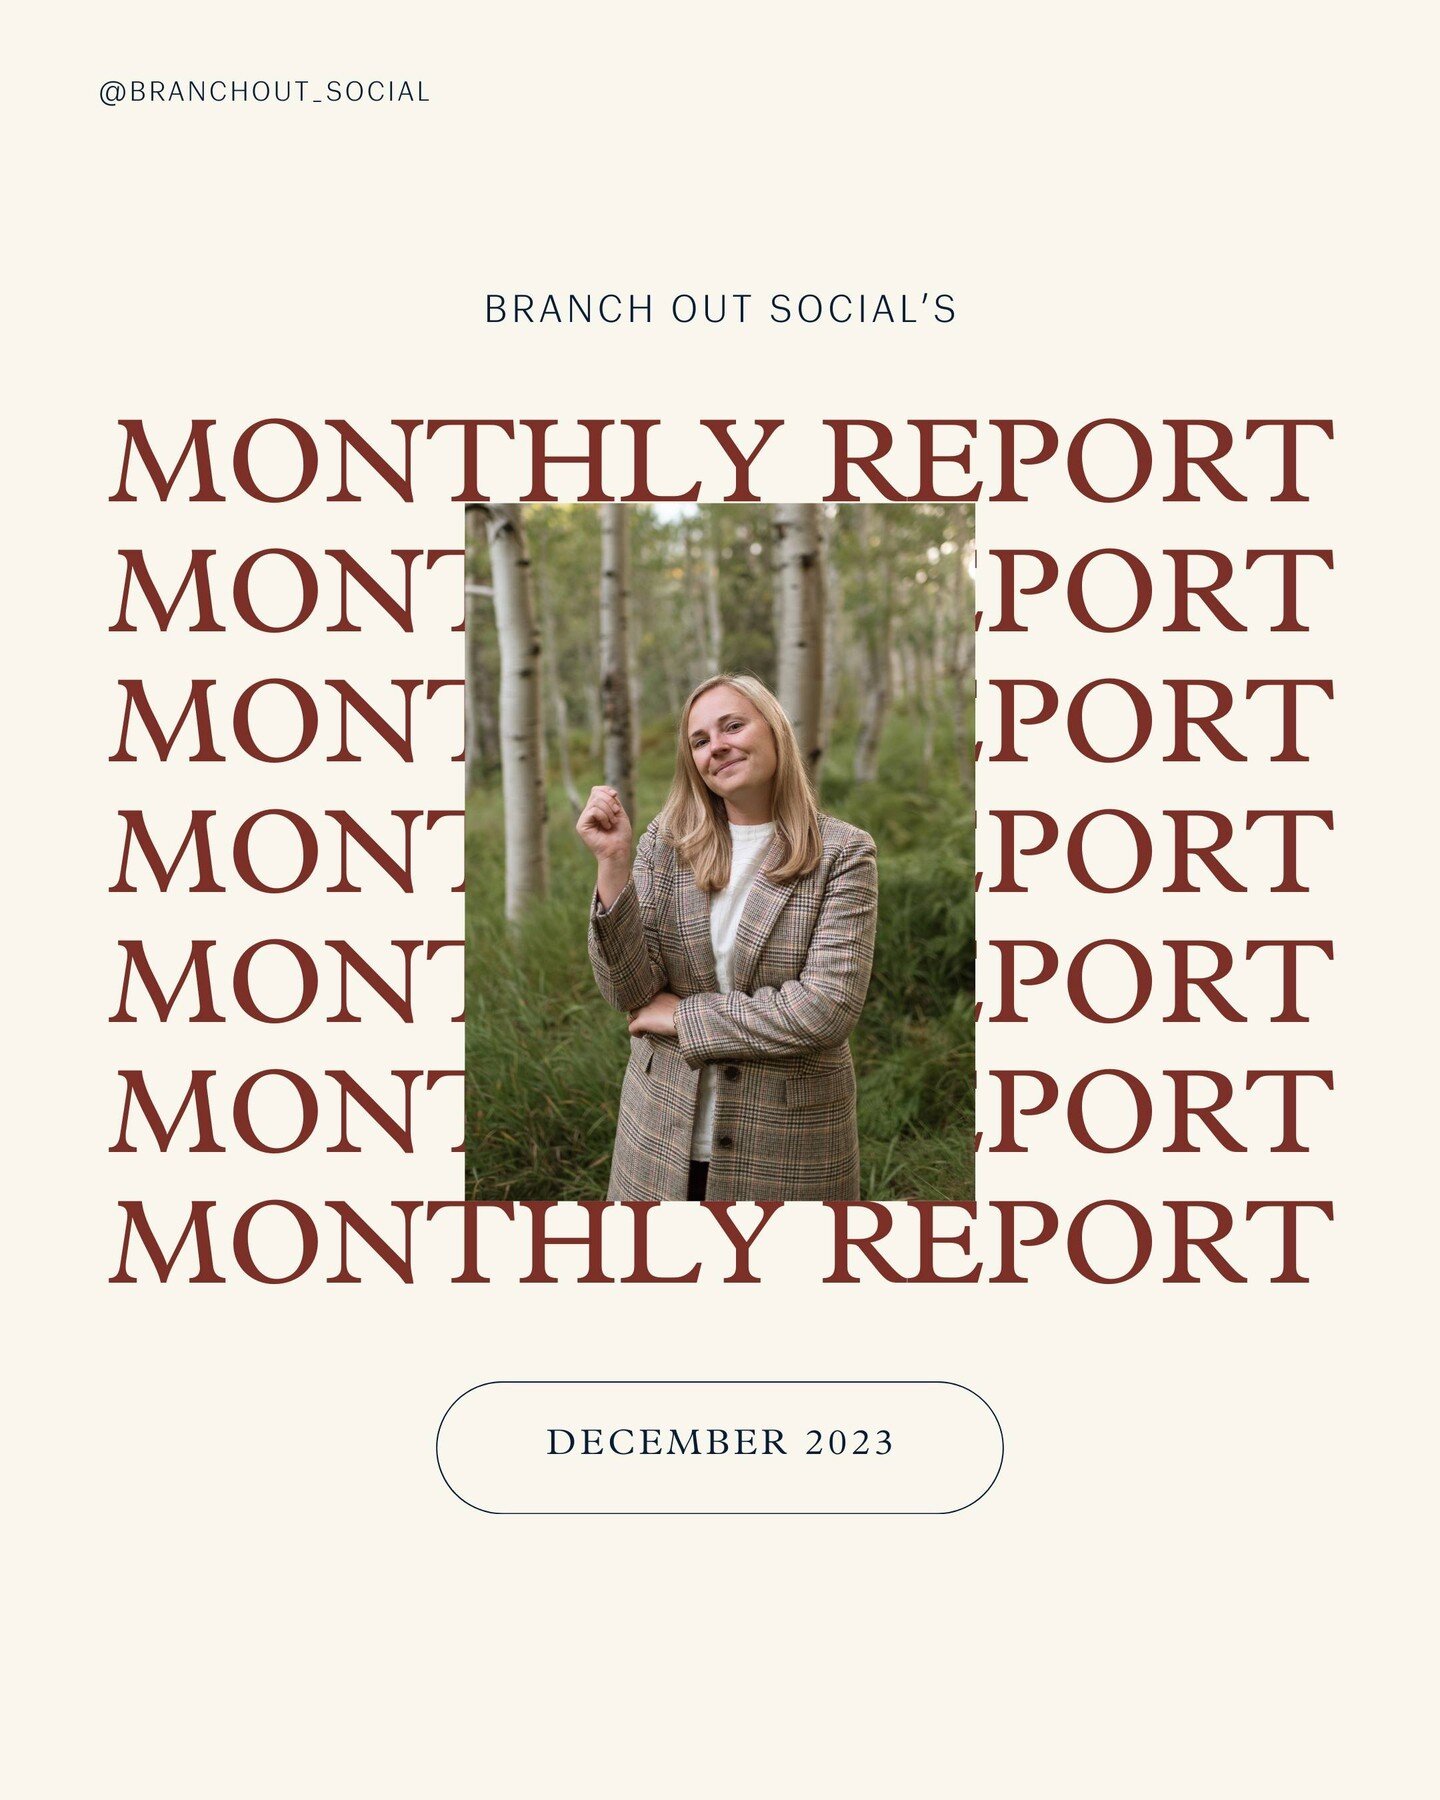 December was a wonderful end to 2023! Check out what's in store for Branch Out Social during the first month of 2024.

#BranchOutSocial #socialmediastrategist #socialmediamanagement #socialmediastrategies #nonprofitsocialmedia #nonprofitmarketing #ut